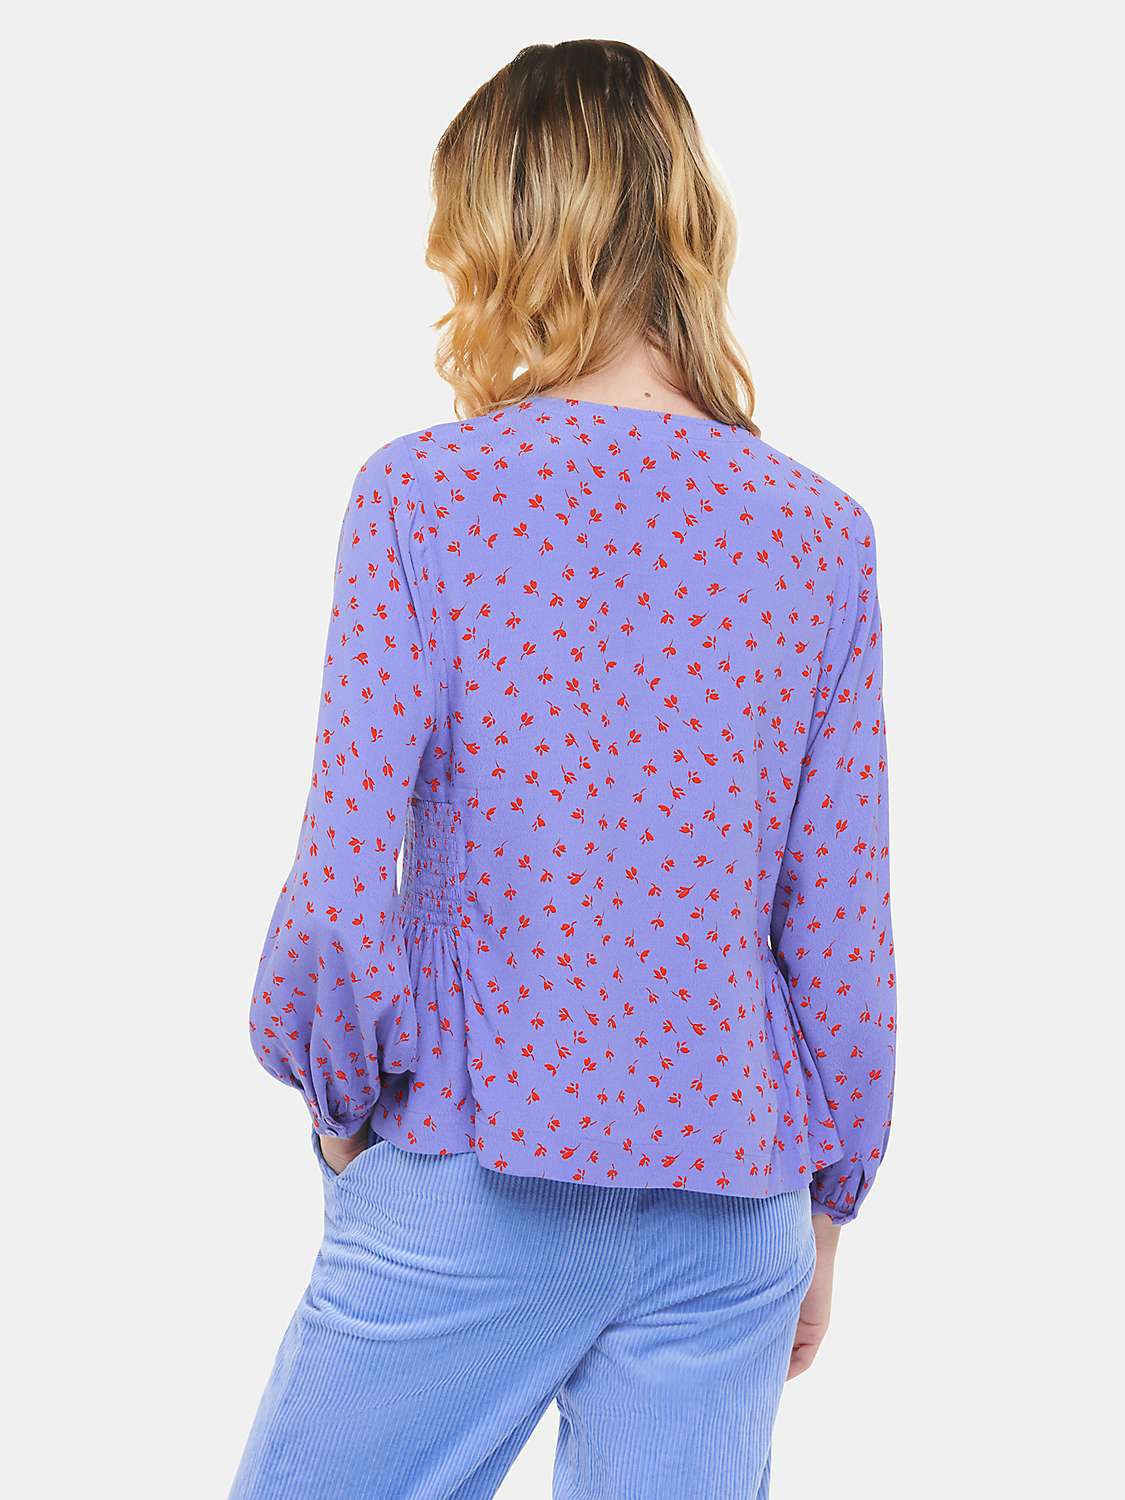 Buy Whistles Scattered Petal Print Blouse, Purple/Red Online at johnlewis.com